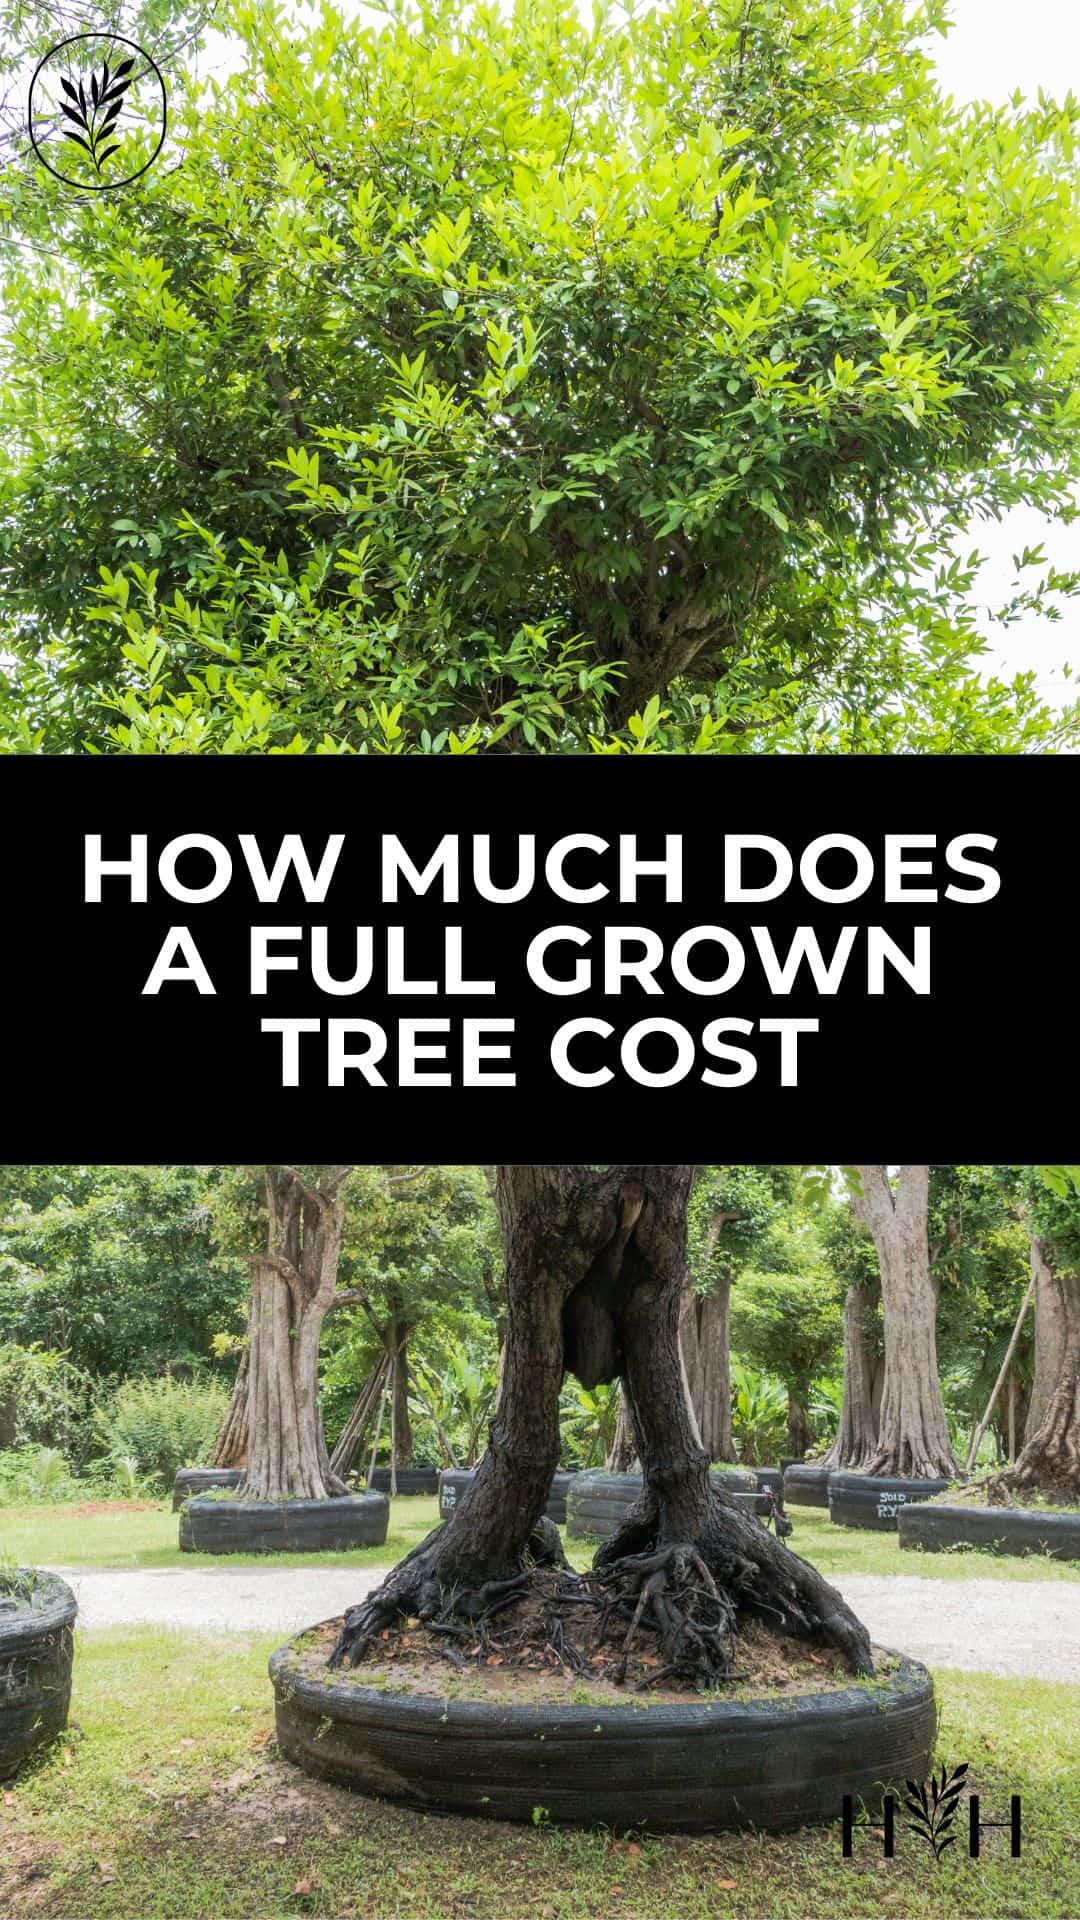 Large trees can add to your curb appeal and can cost a small fortune to purchase and plant! Here are some example prices for buying mature trees and tips for how to save some cash when adding large, full-grown trees to your landscape. Via @home4theharvest